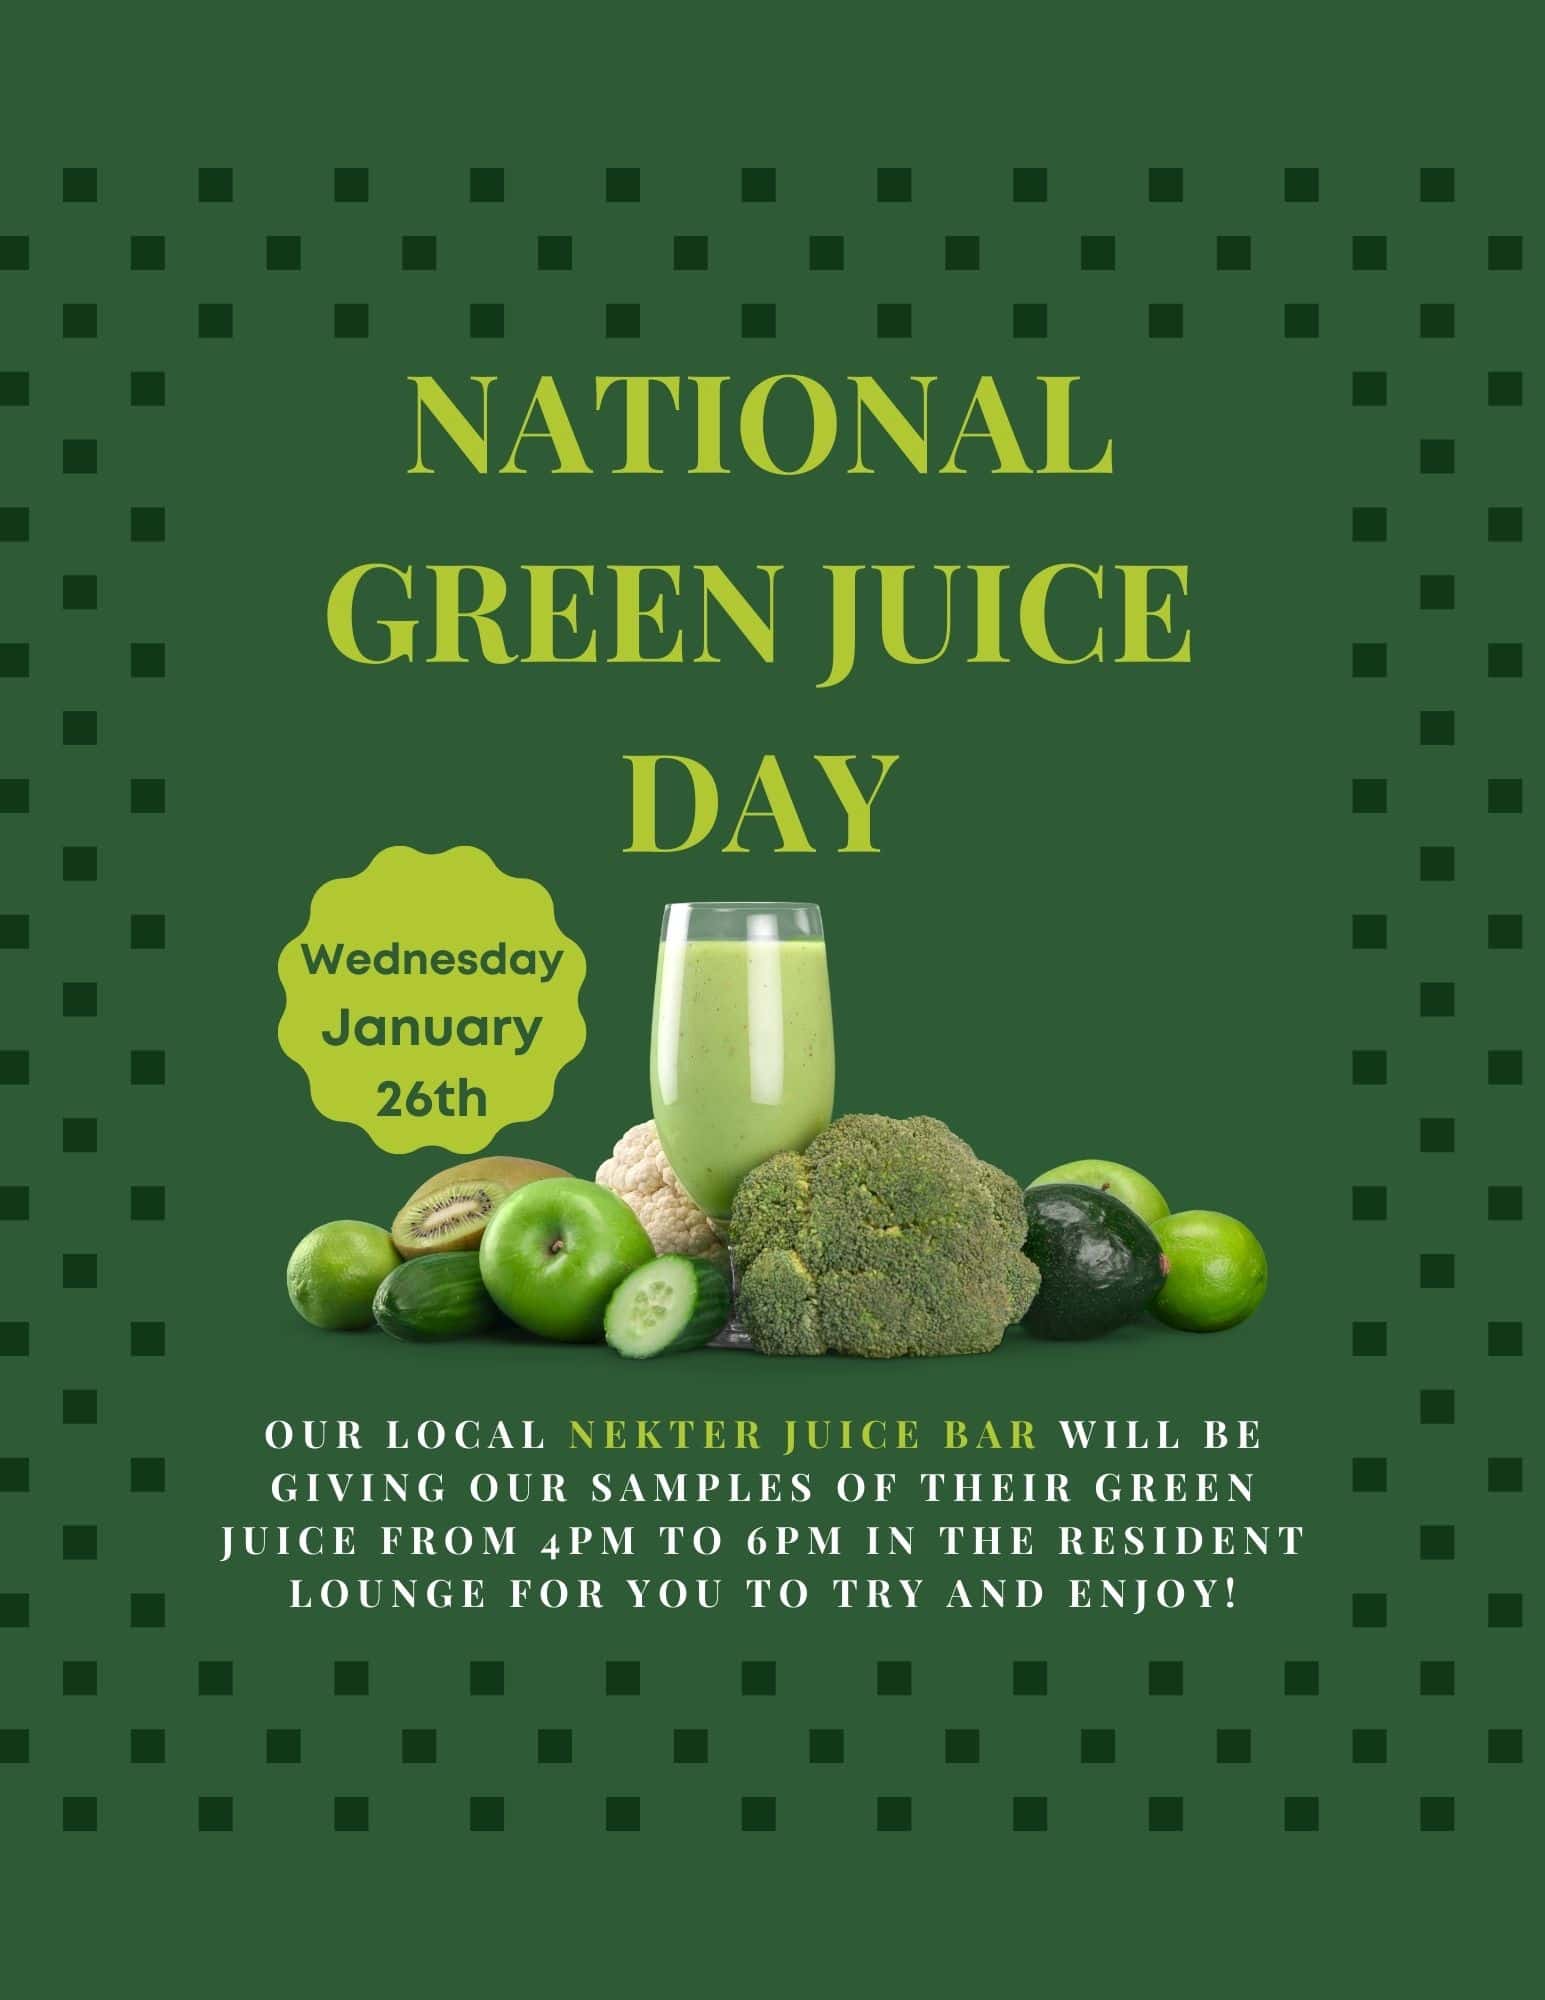 National green juice day poster featuring Apartments in The Woodlands TX.